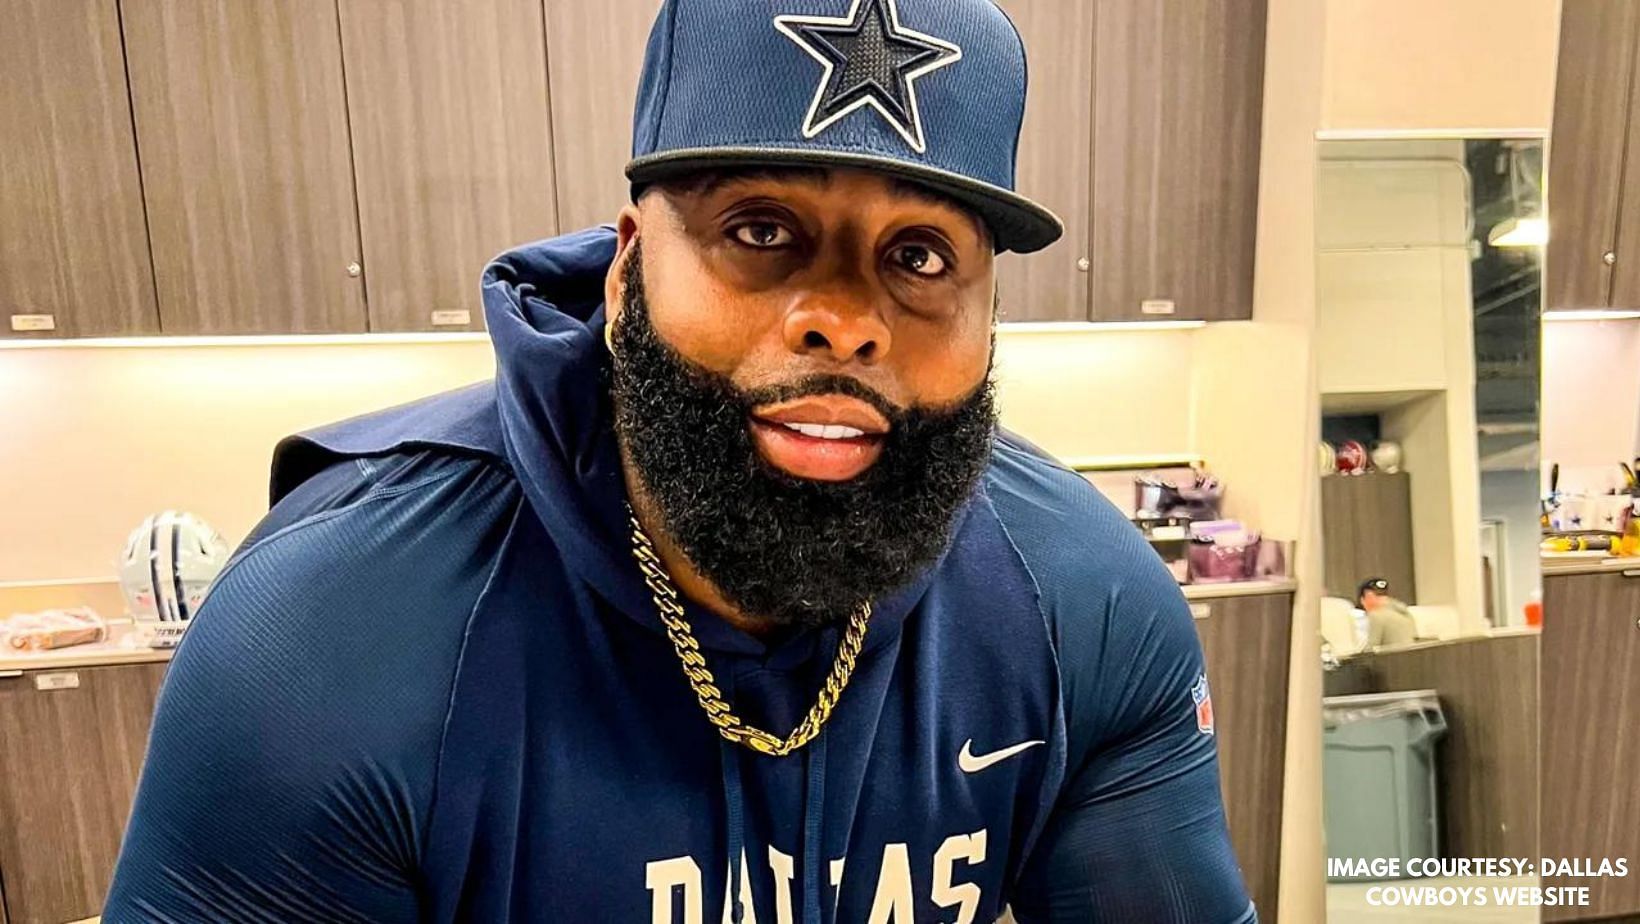 Jason Peters stands by 2018 comments on Dallas Cowboys